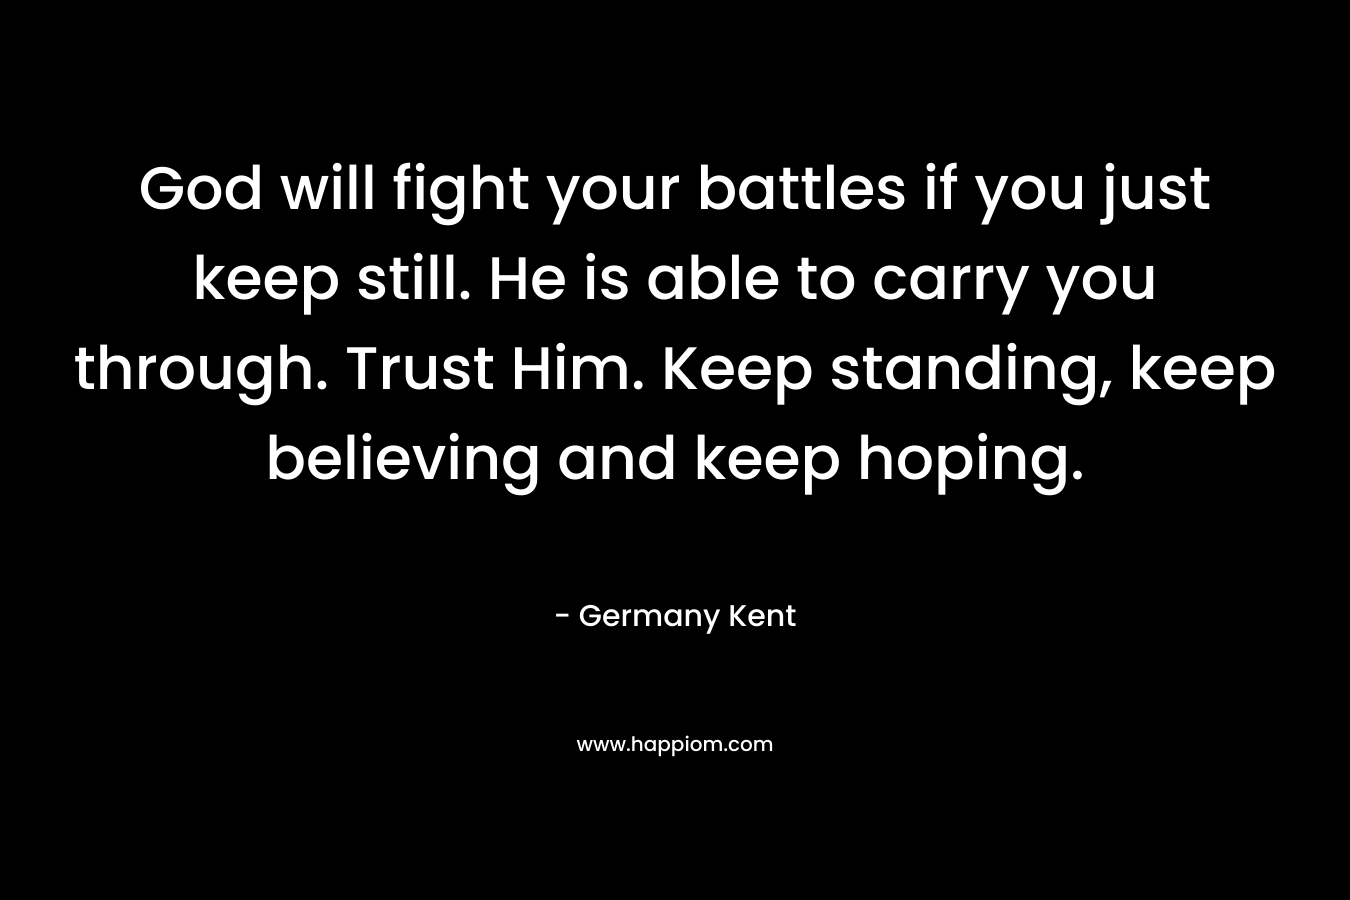 God will fight your battles if you just keep still. He is able to carry you through. Trust Him. Keep standing, keep believing and keep hoping.